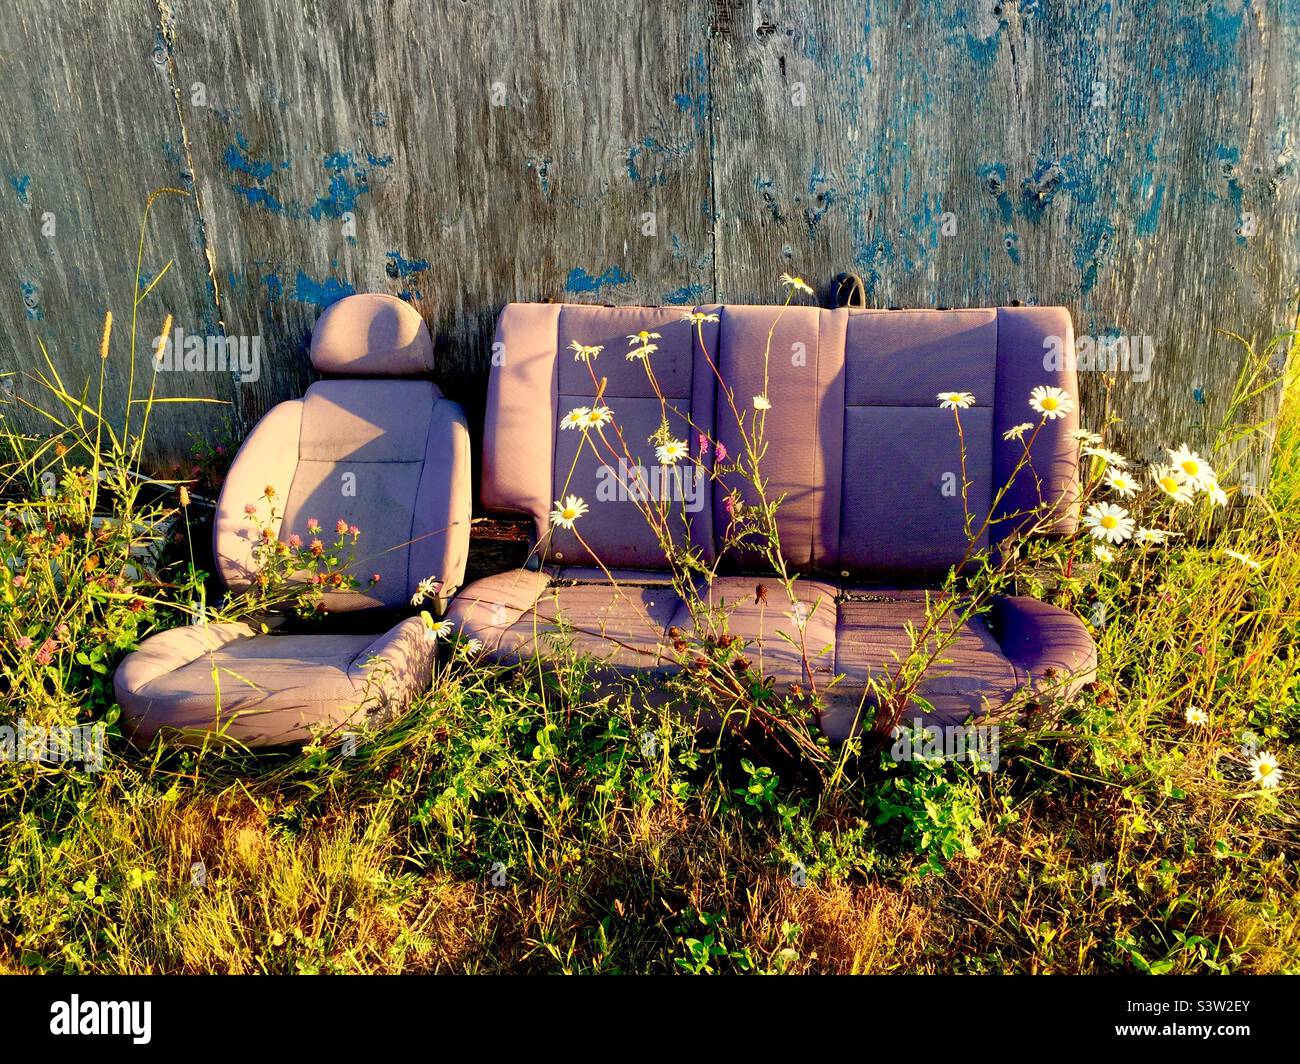 Junked car seats where daisies grow, Halifax, Canada. Outdoor pollution. Stock Photo